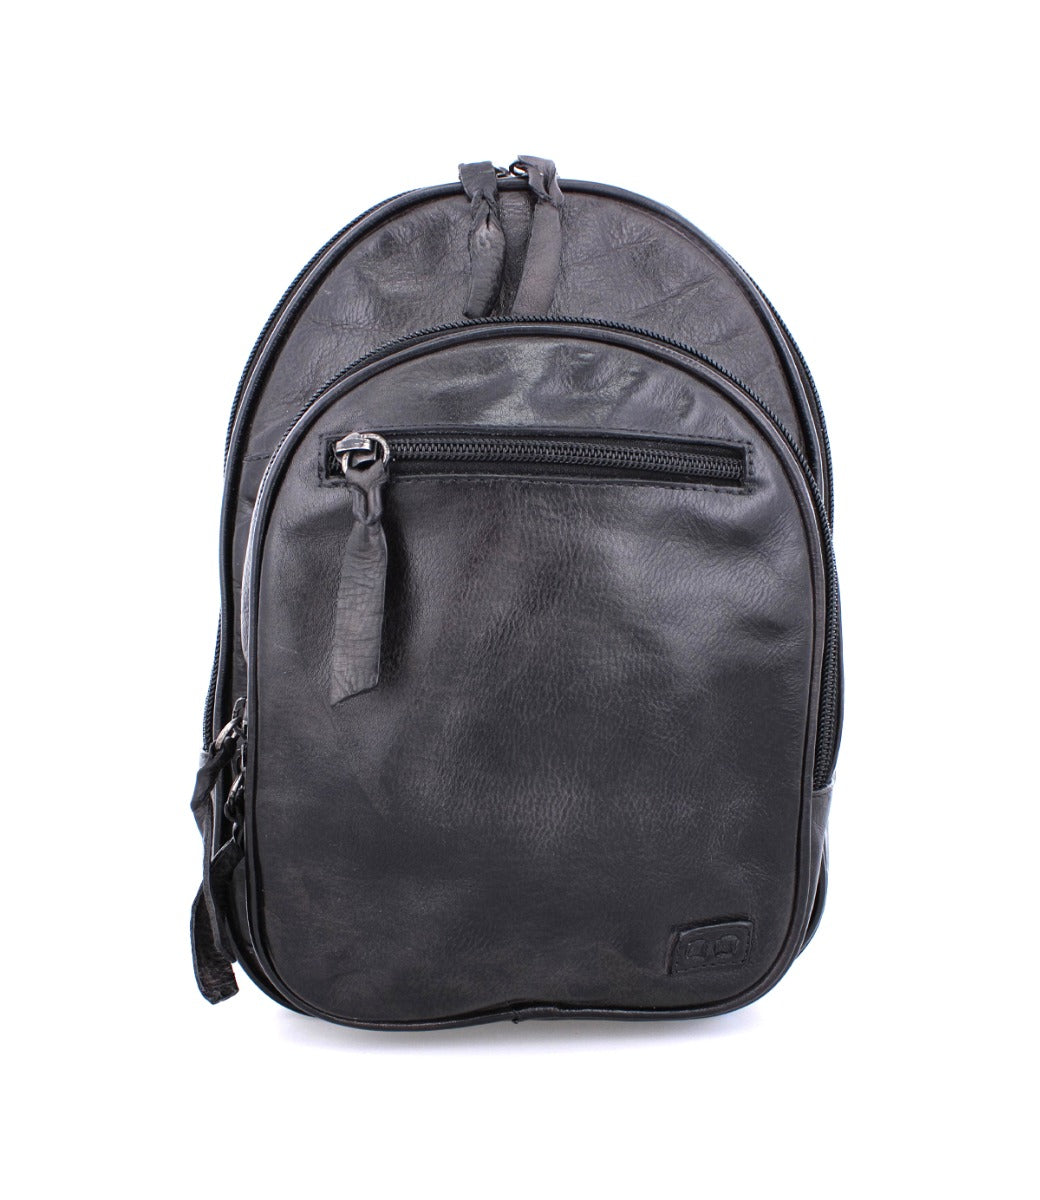 A Dominique black leather backpack on a white background by Bed Stu.